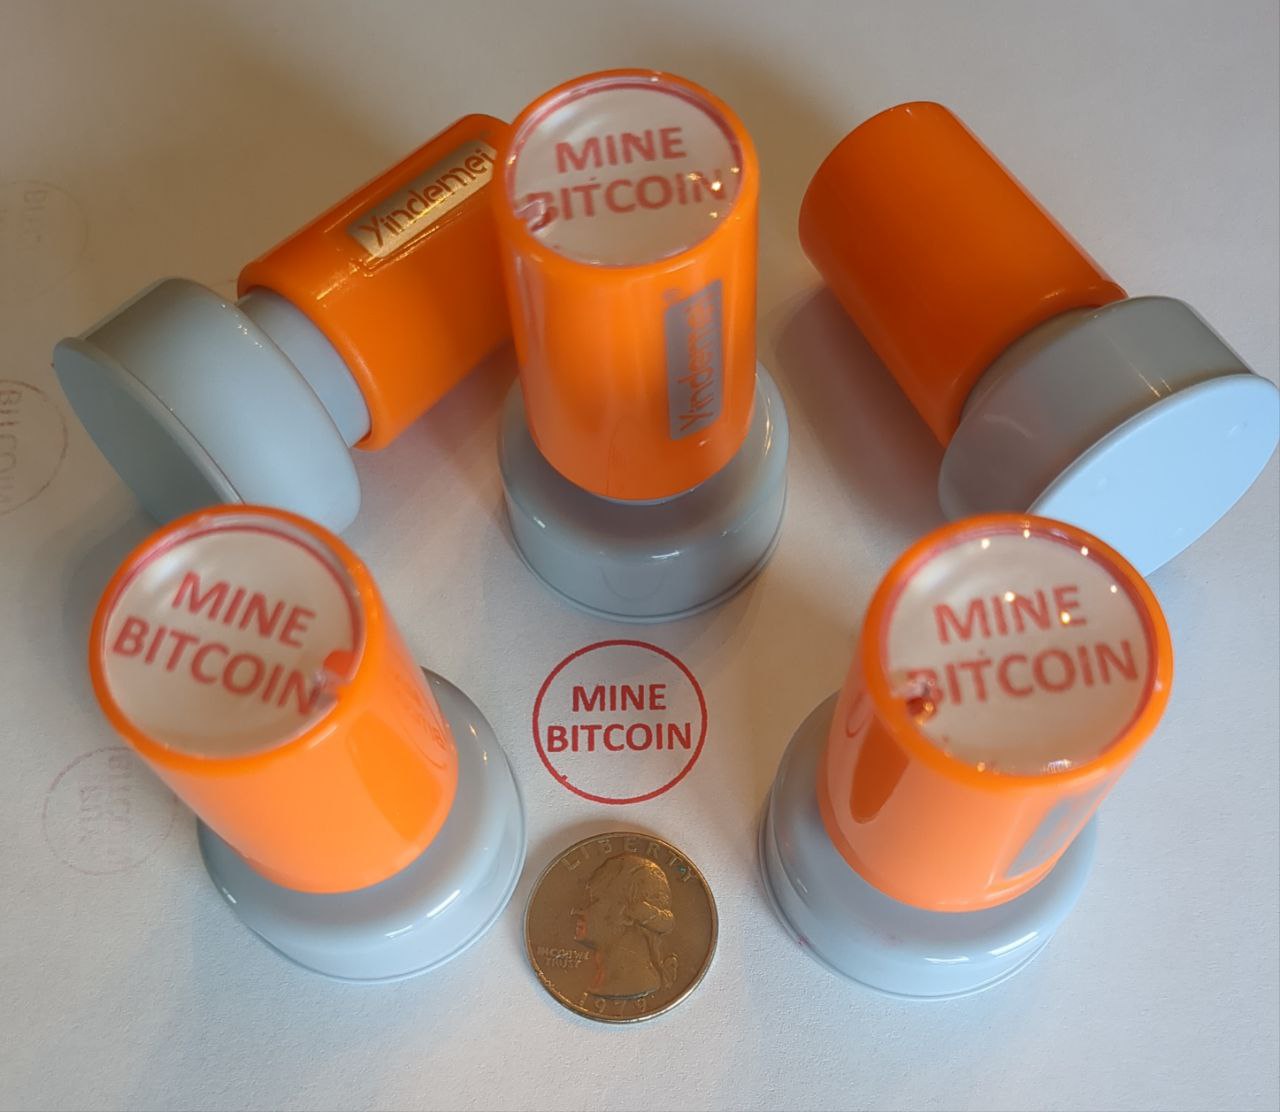 Mine Bitcoin 5 Stamps - add-on to an existing order